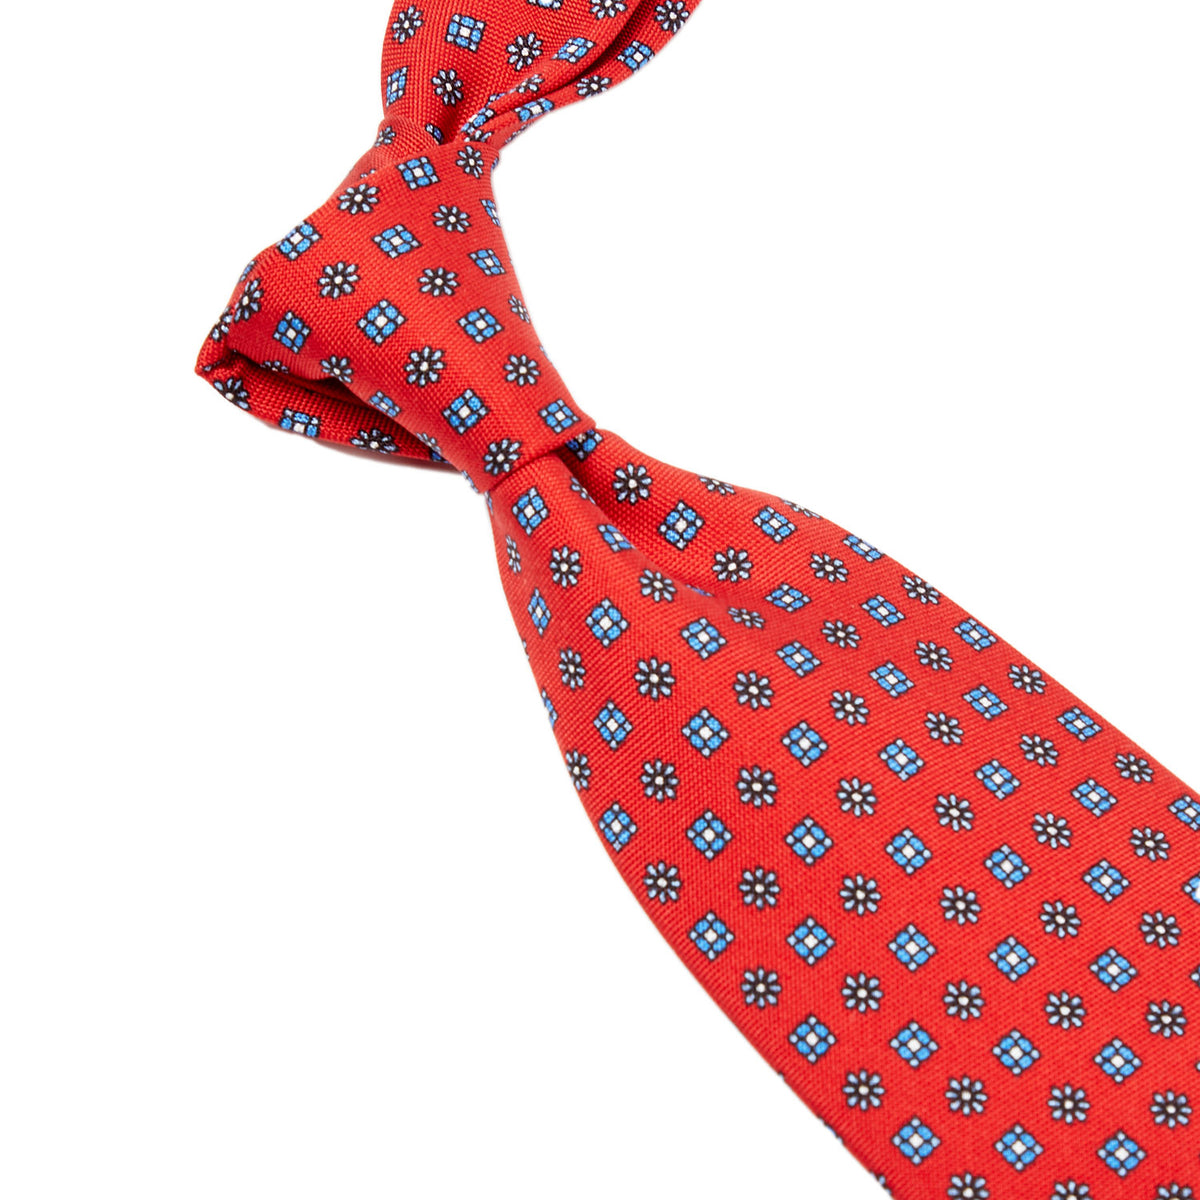 A KirbyAllison.com Sovereign Grade Red Floral 25oz Silk Hopsack Tie (150x8.5 cm) with blue and white polka dots.